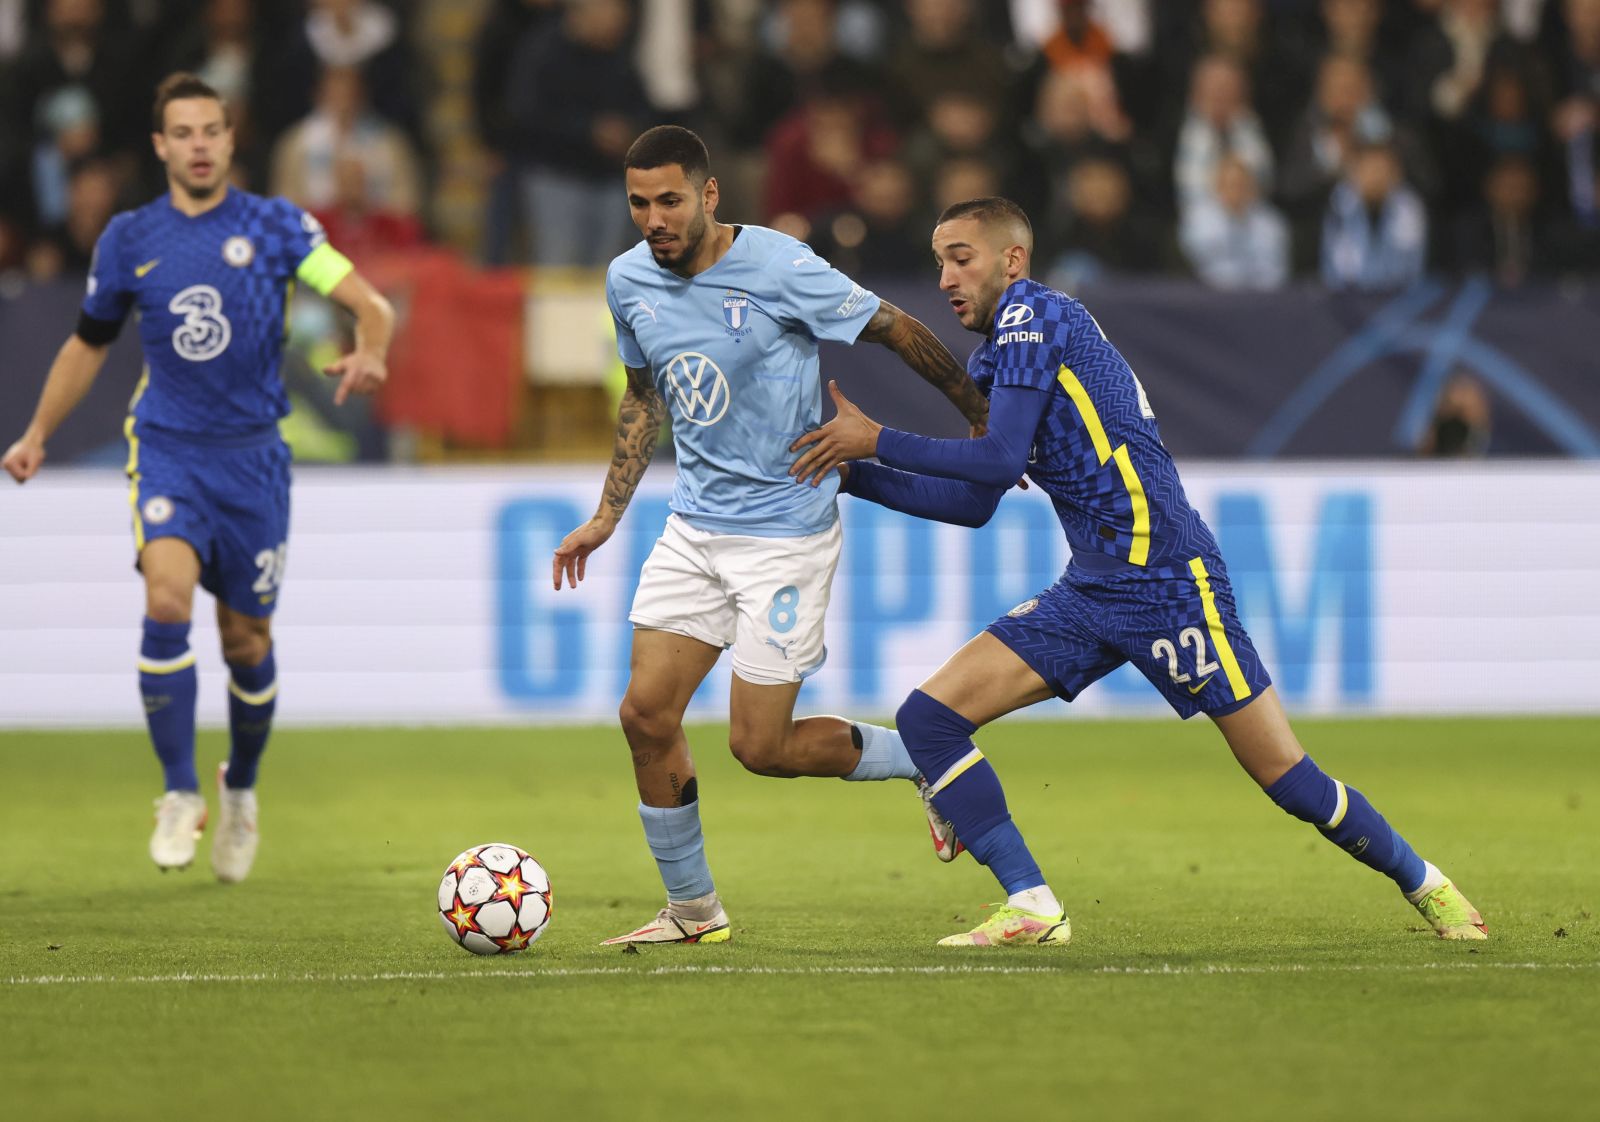 epa09559903 Malmo's Sergio Pena (L) and Hakim Ziyech of Chelsea in action during the UEFA Champions League group H soccer match between Malmo FF and Chelsea FC in Malmo, Sweden, 02 November 2021.  EPA/Andreas Hillergren/TT  SWEDEN OUT